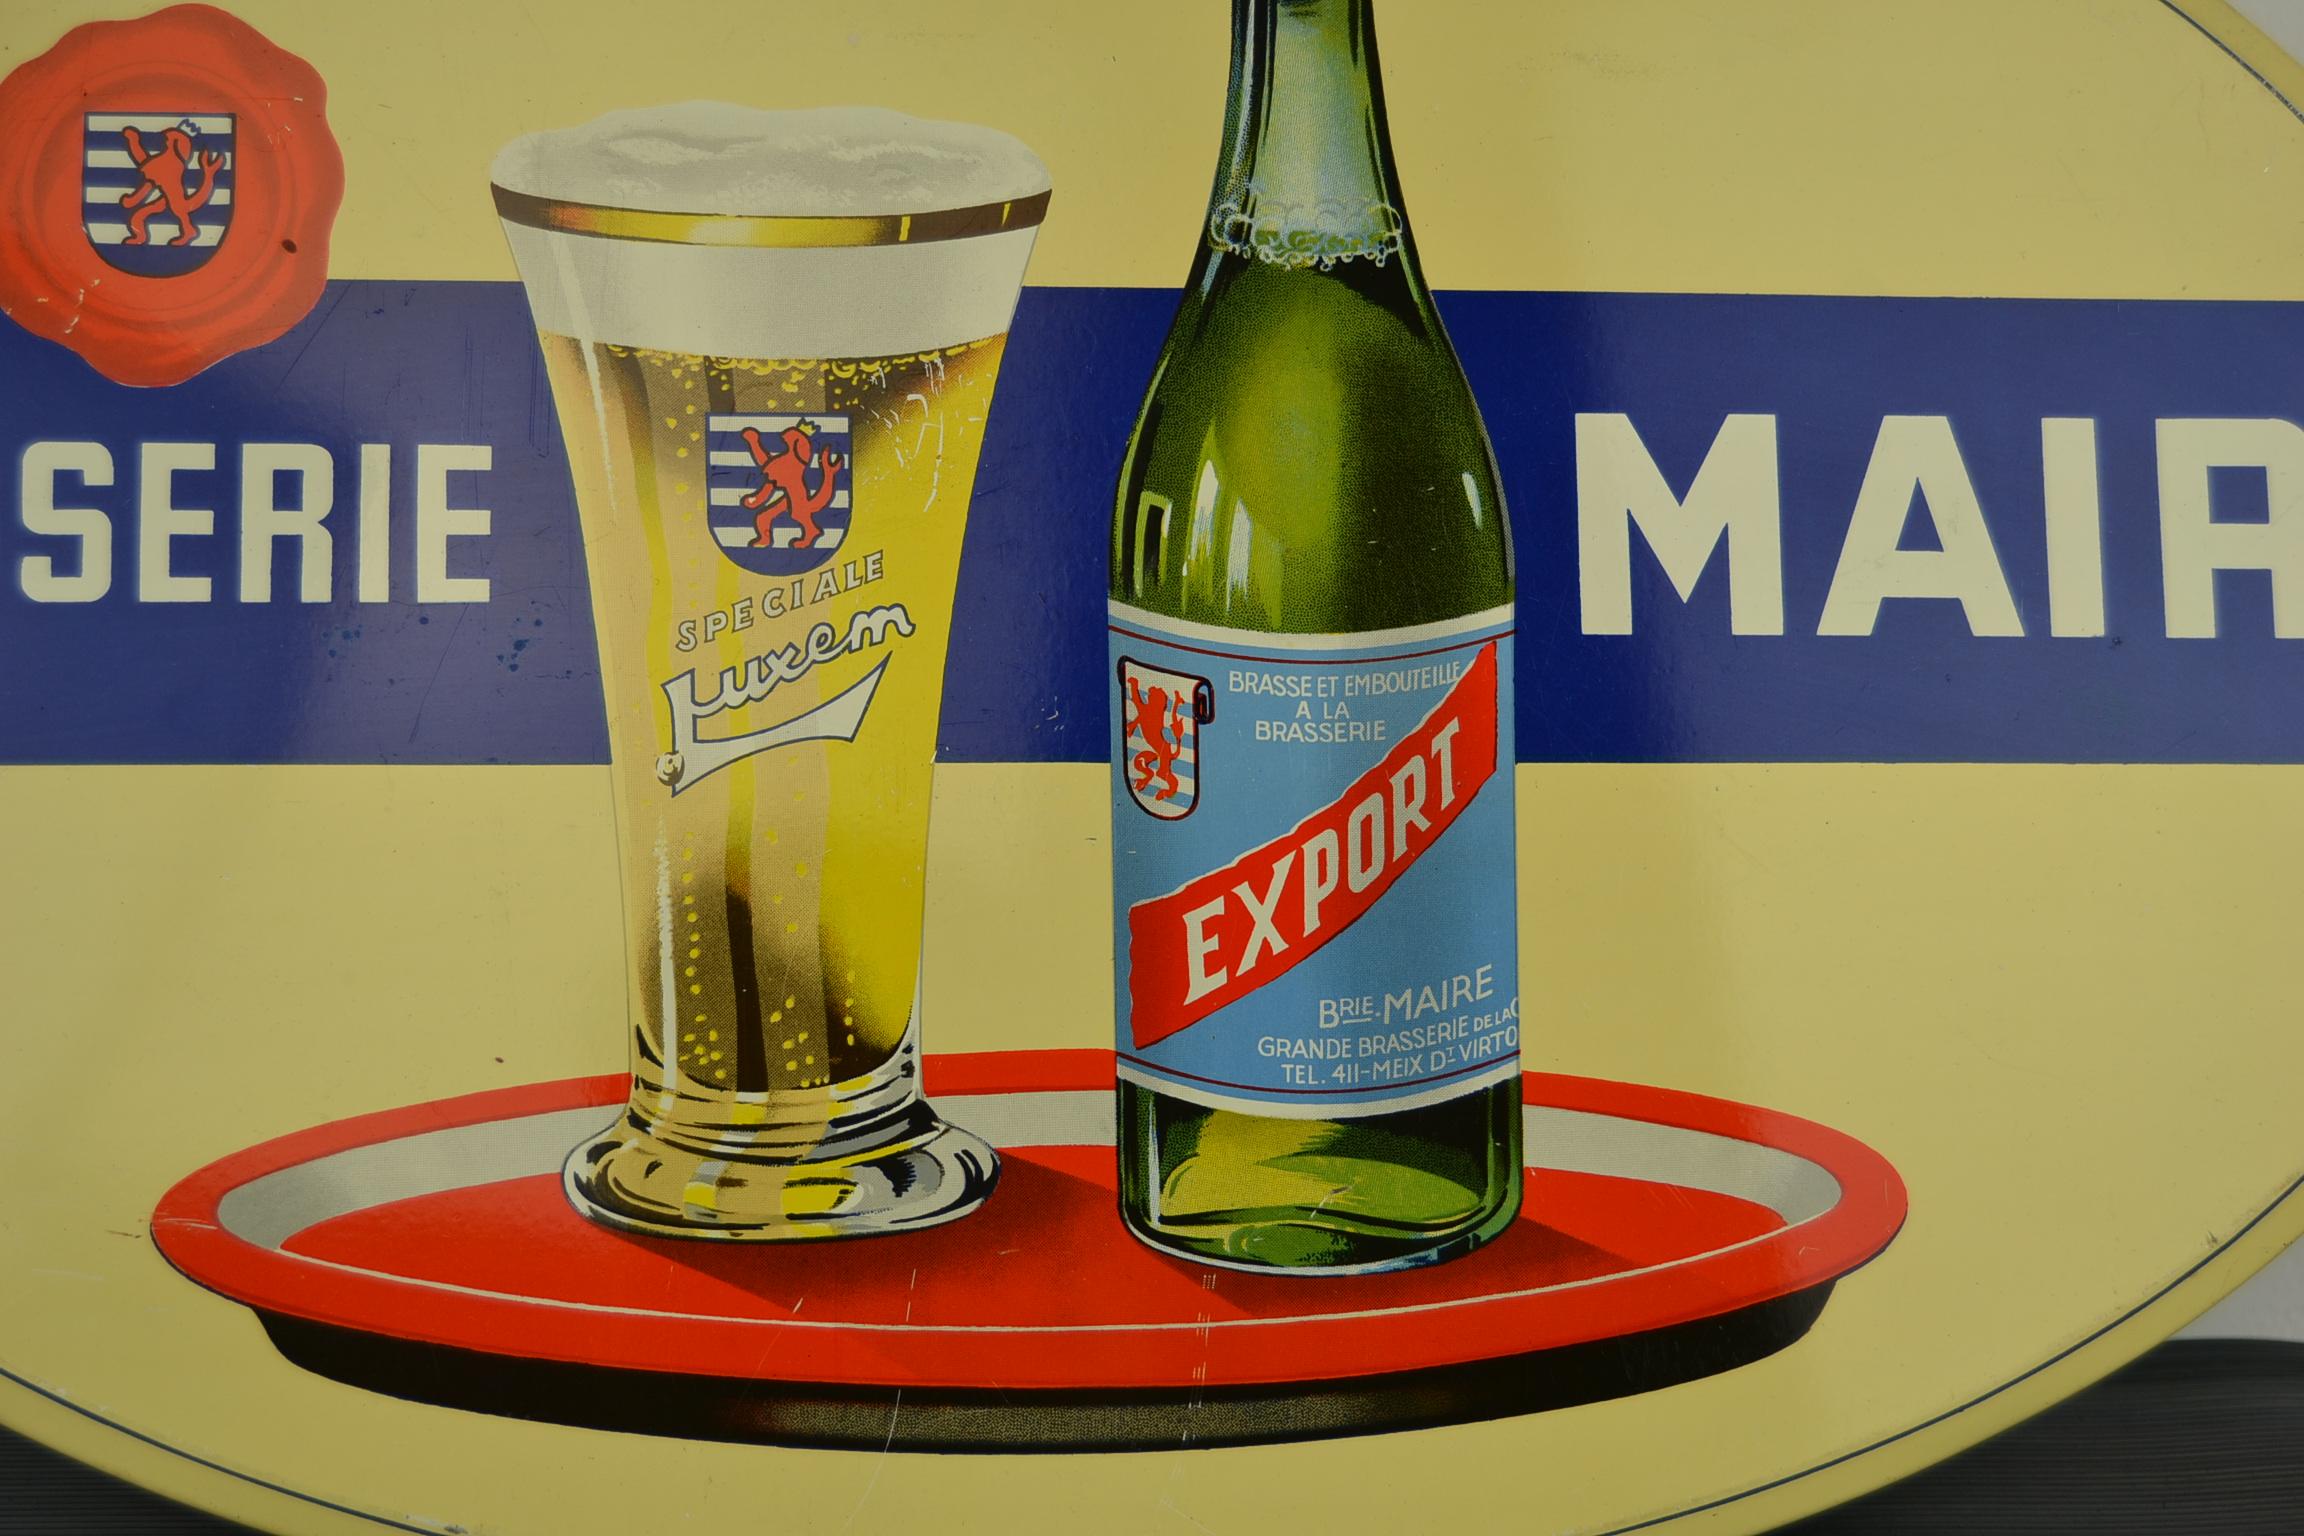 1950s Tin advertising sign for Belgian beer: 
Brasserie Maire - Speciale Luxem - Export Beer.
An advertising sign with a great design for blond beer:  a beer bottle and a beer glass on a porcelain serving tray. 

This oval sign is made by Rob Otten